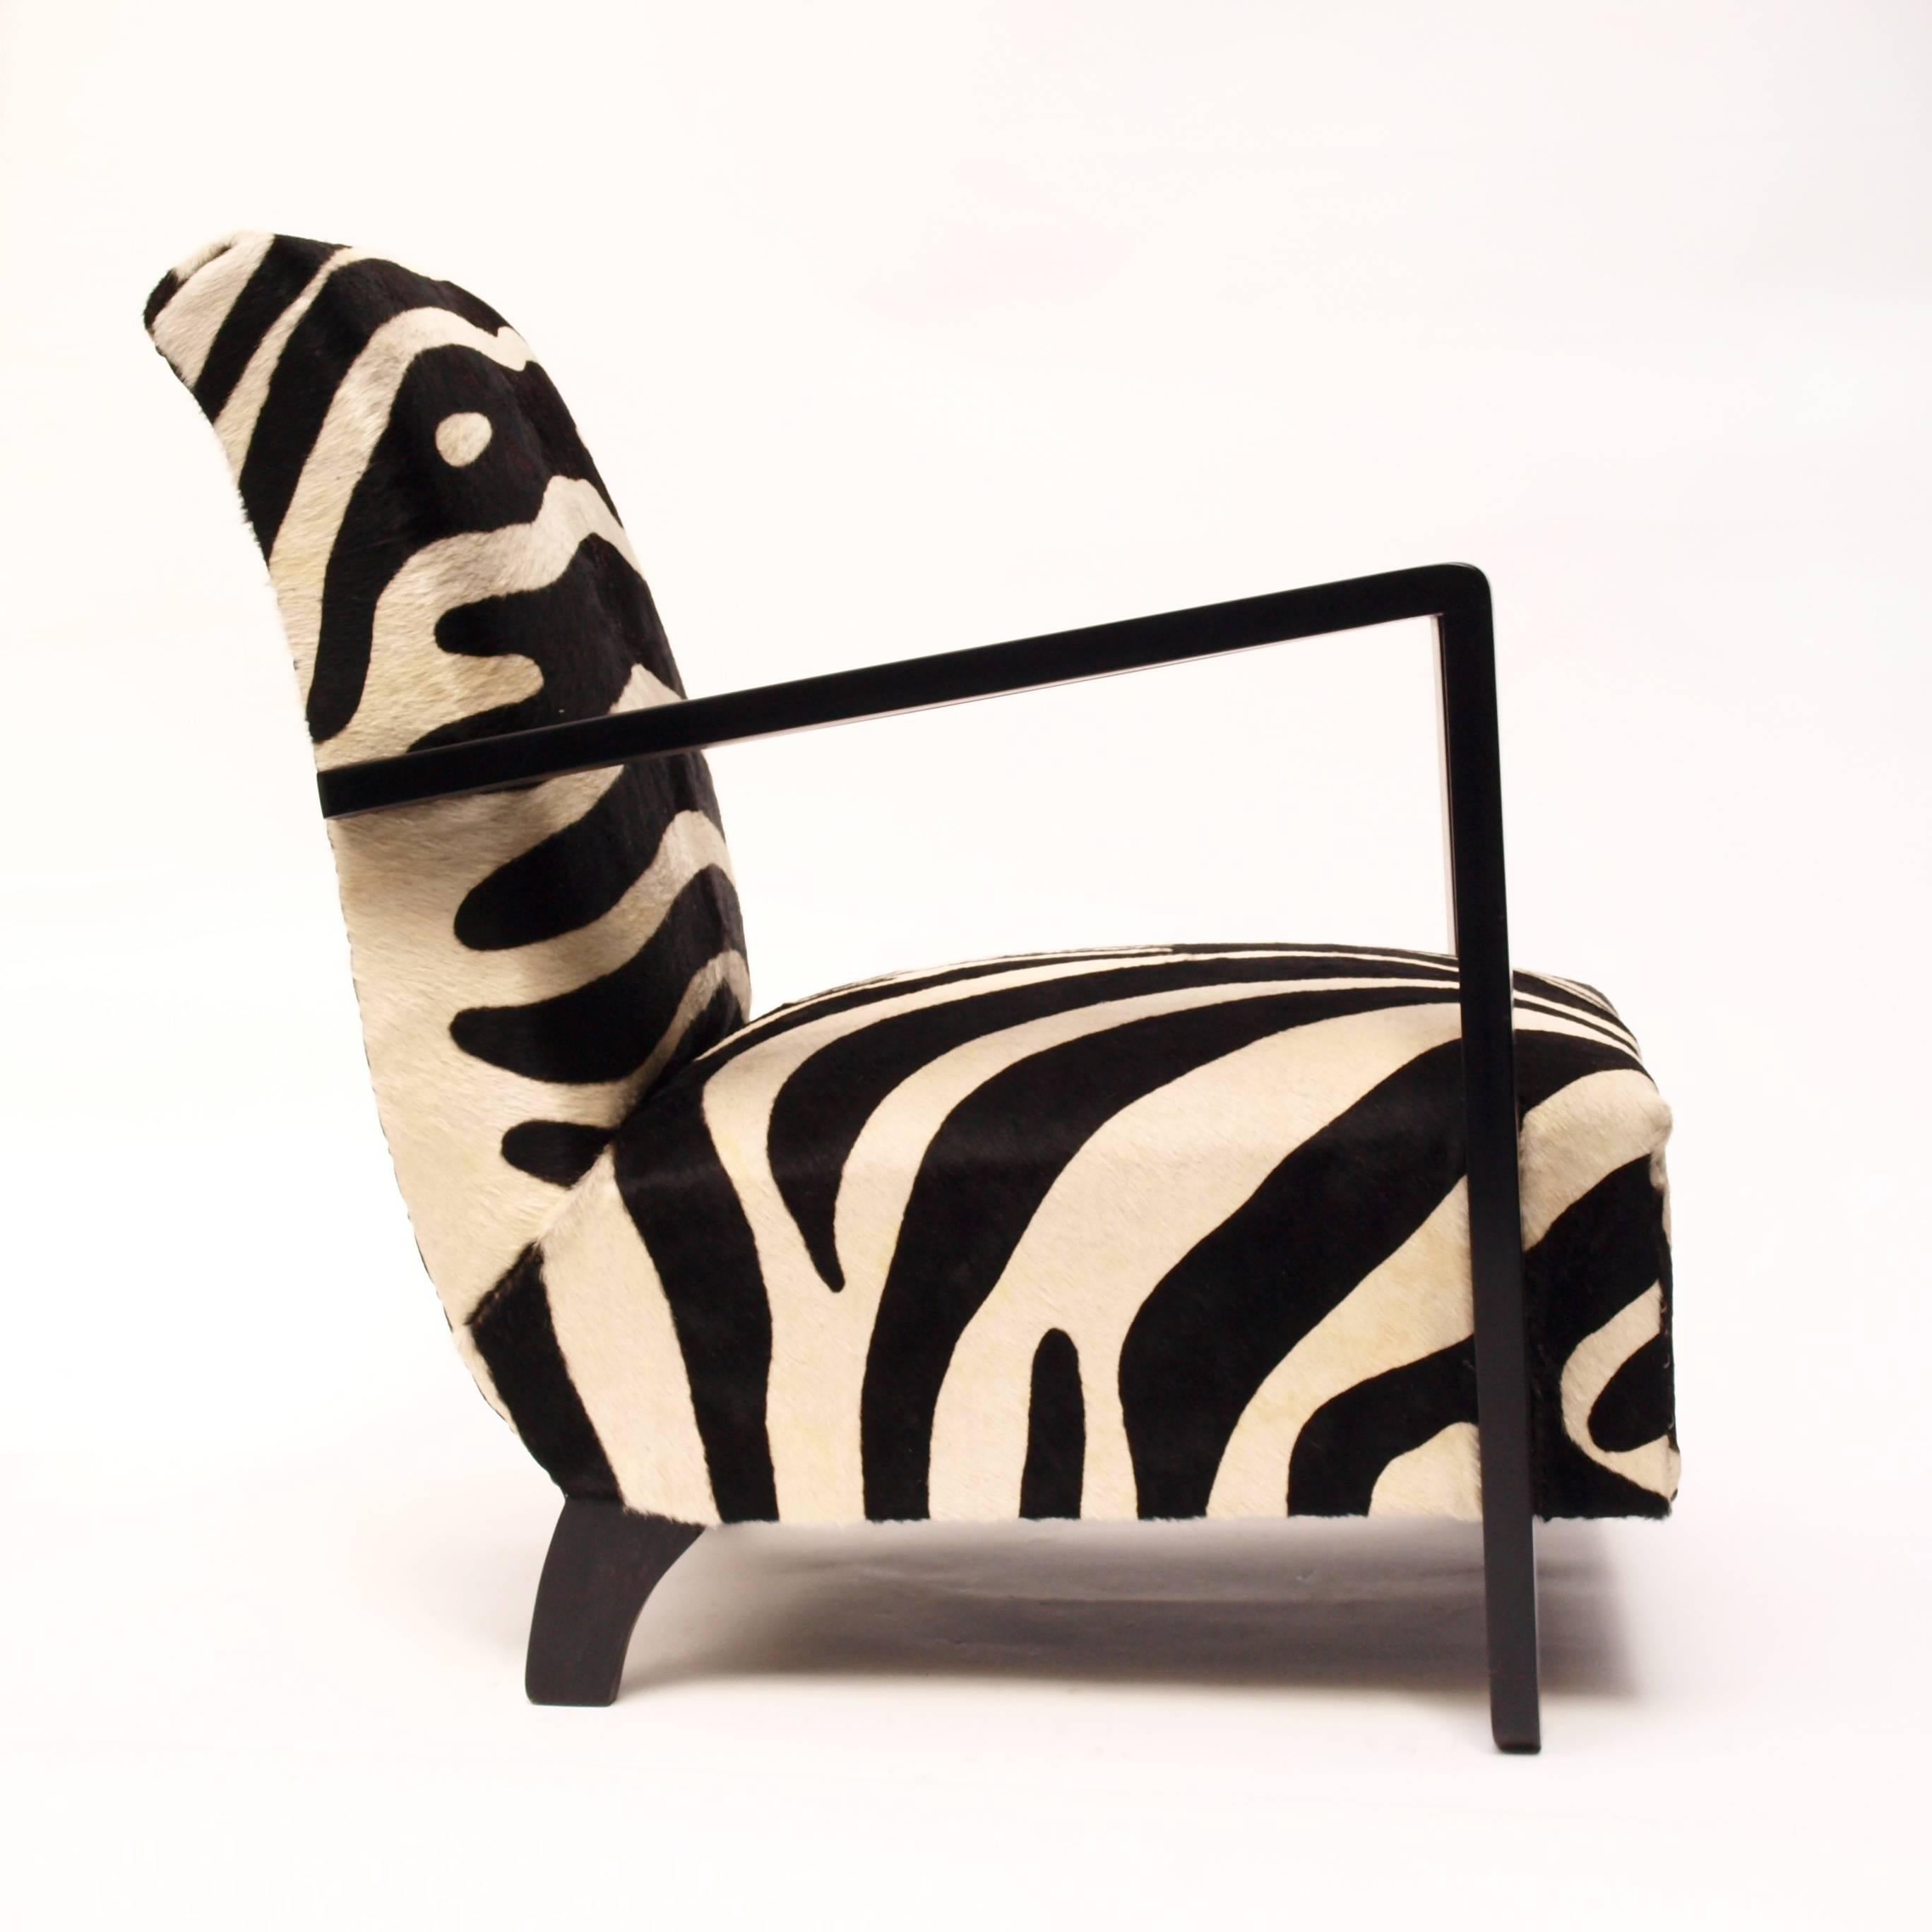 A  highly decorative French open arm chair in the manner of Rene Gabriel with beautiful proportions and upholstered with zebra print cowhide.